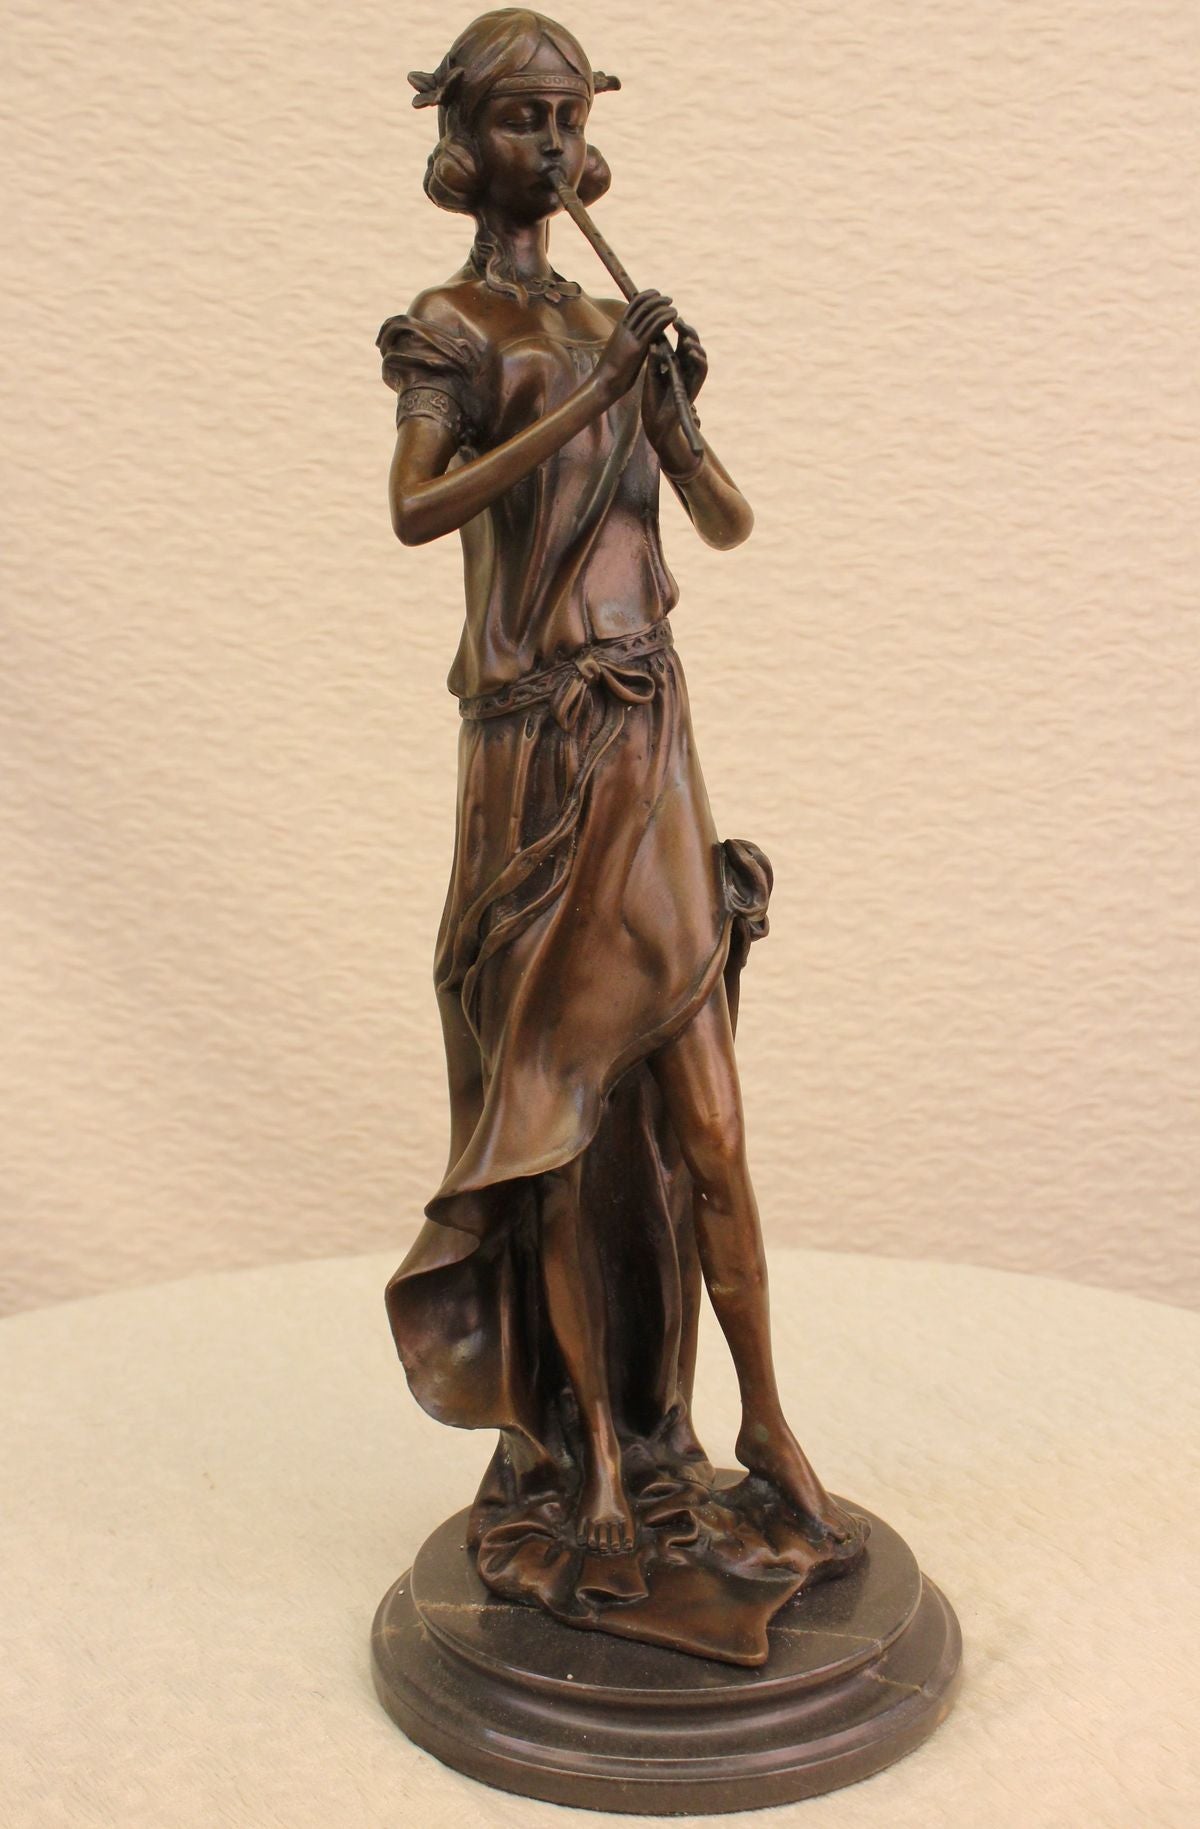 Young Girl Flute Playing Handcrafted Bronze Sculpture Statue Figurine Figure Art